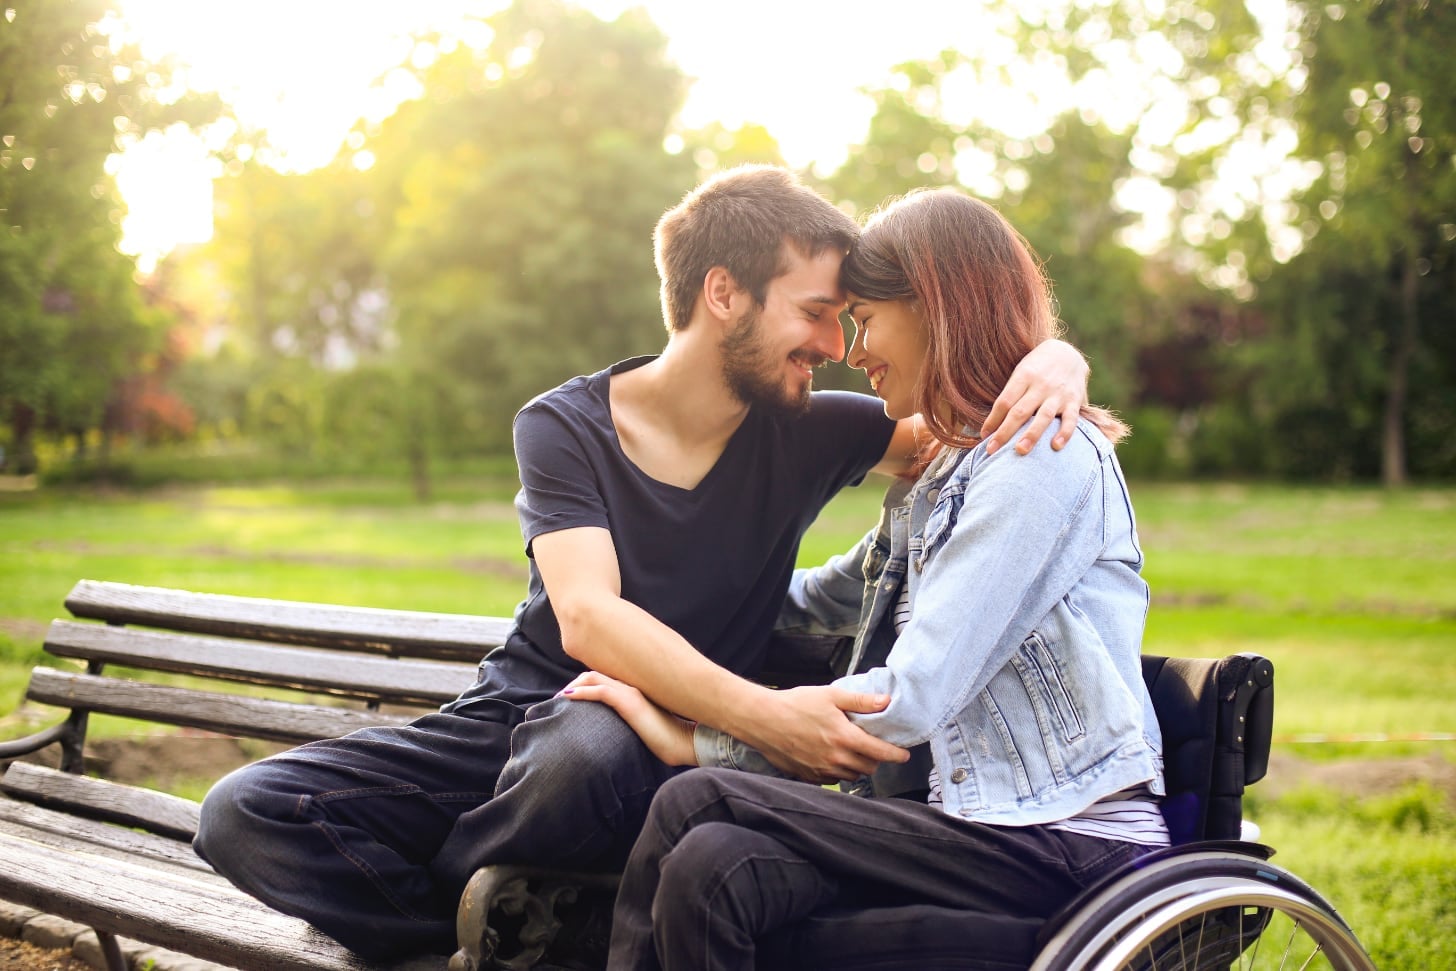 Misconceptions Around Intimacy In The Disability Community Popsugar Love And Sex 